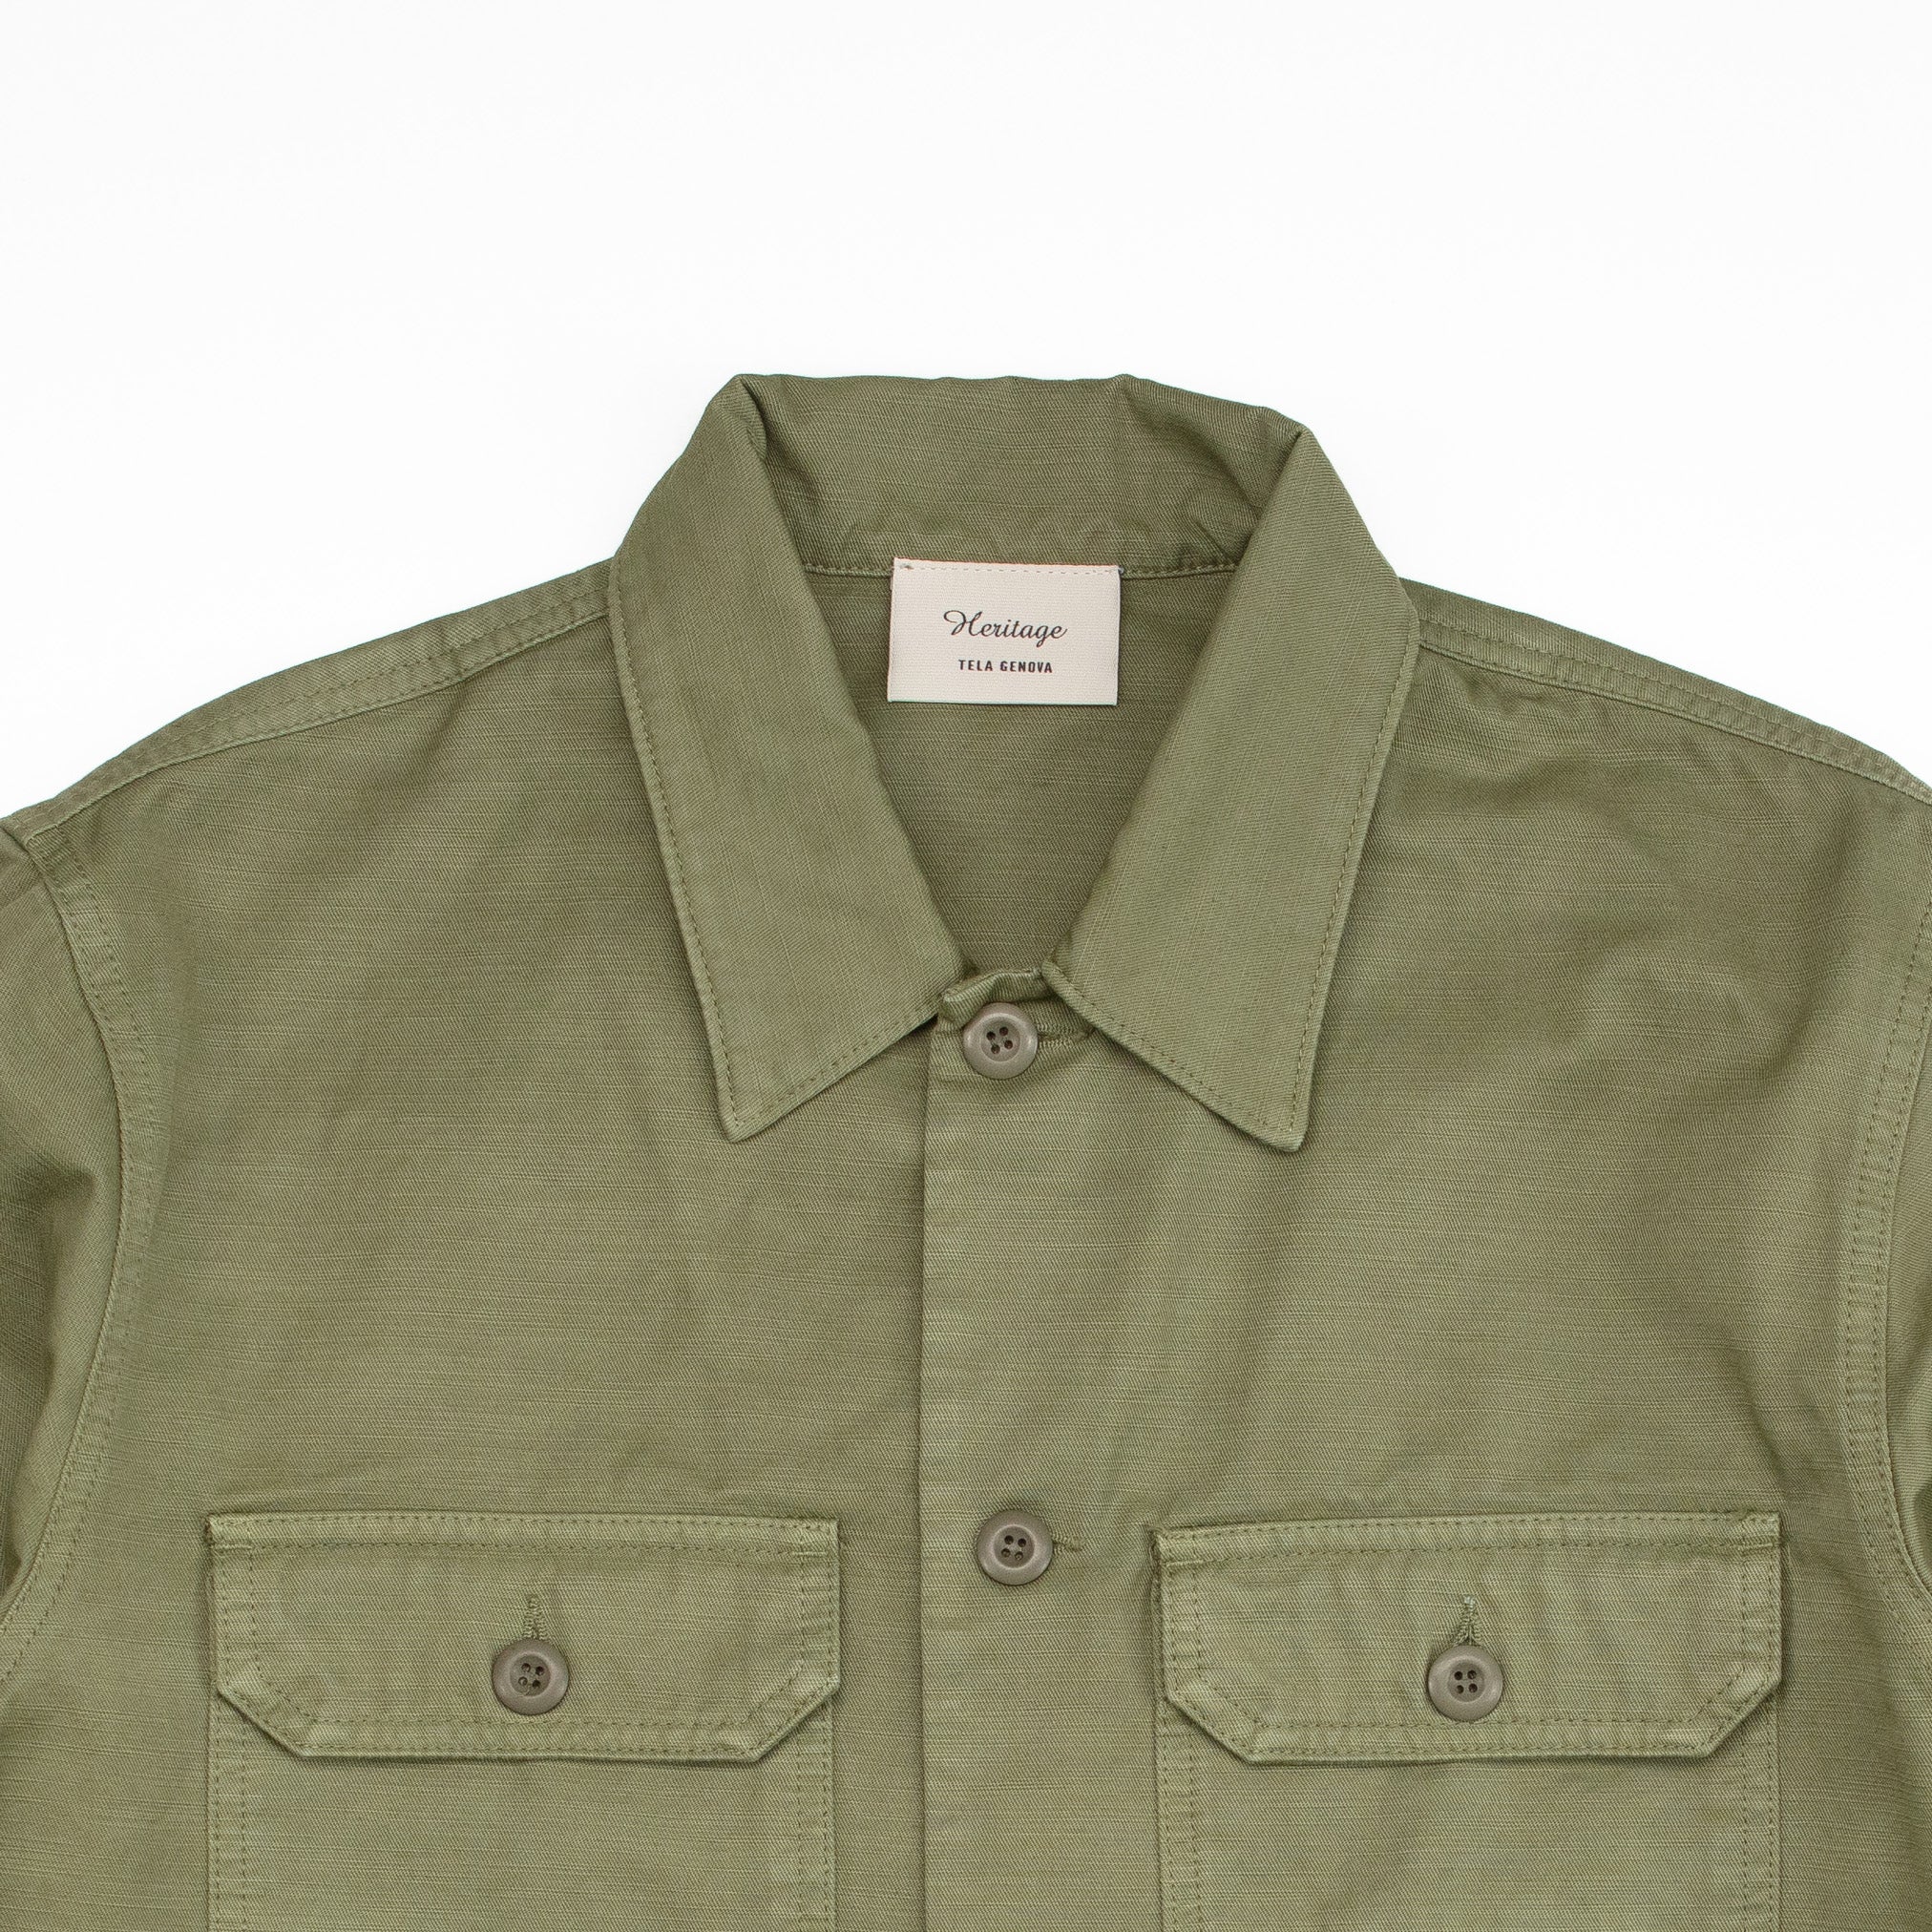 Greto Over Shirt in Military Green